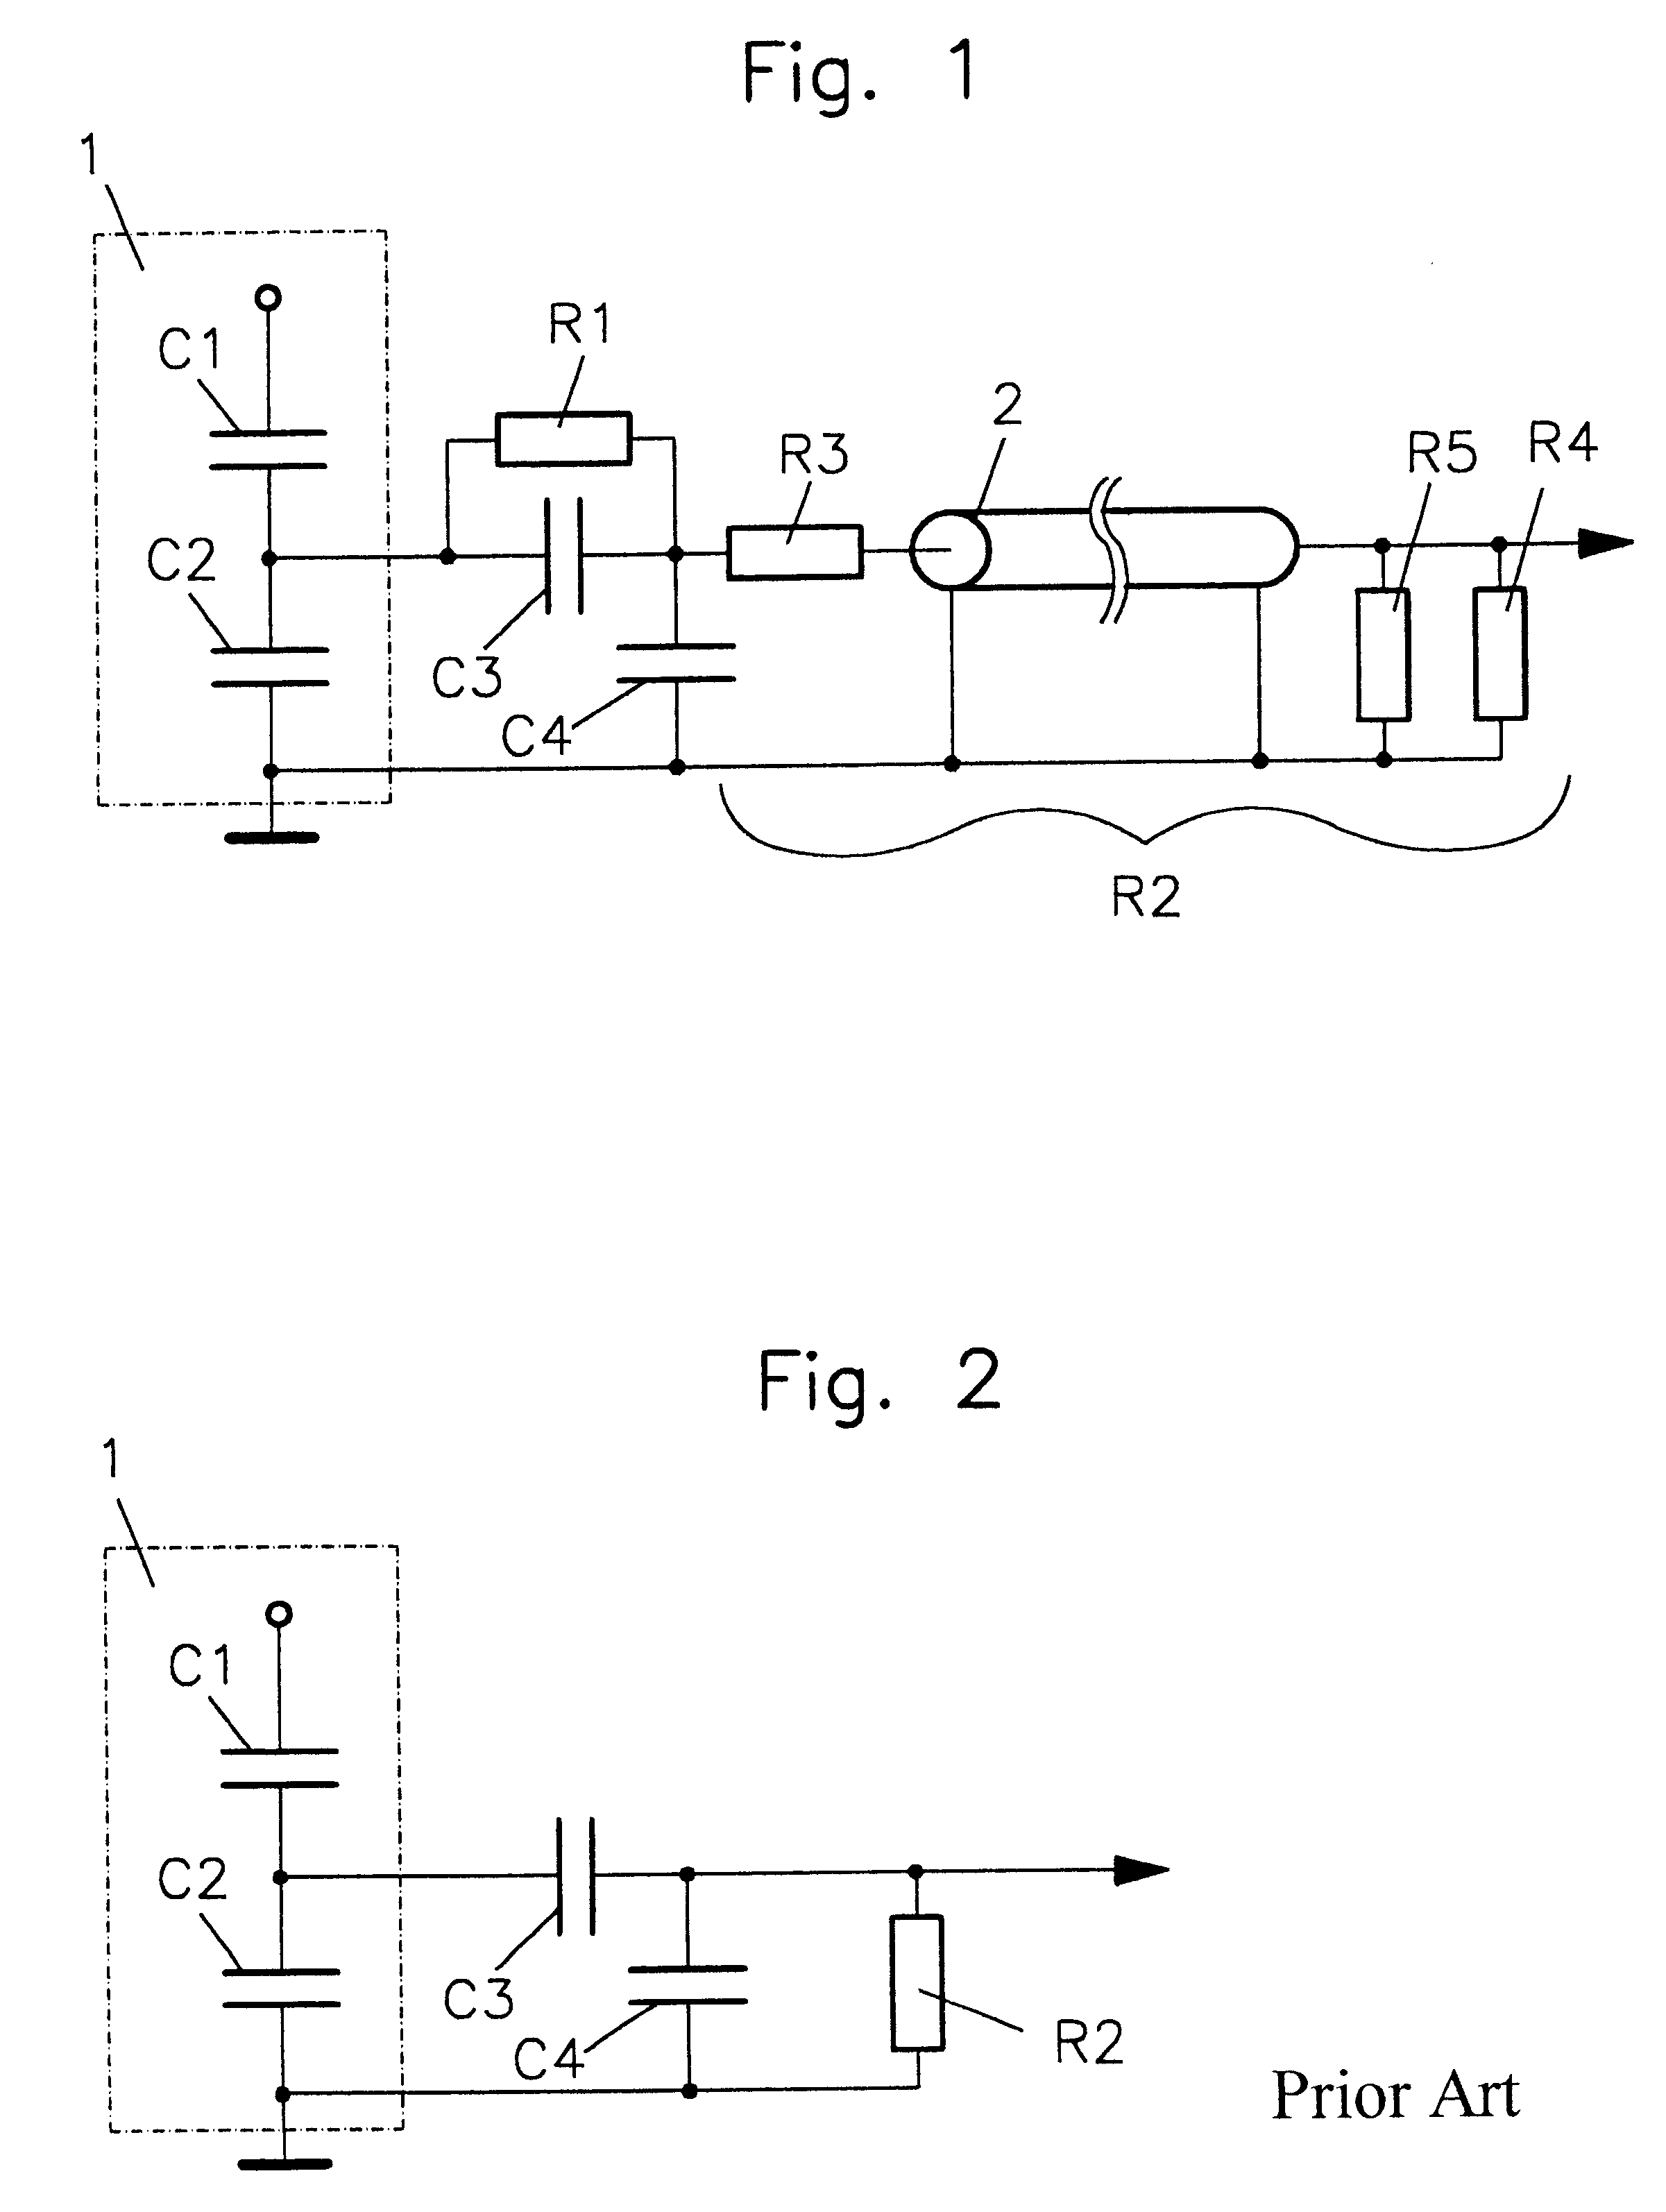 Capacitive voltage divider for measuring high voltage pulses with millisecond pulse duration